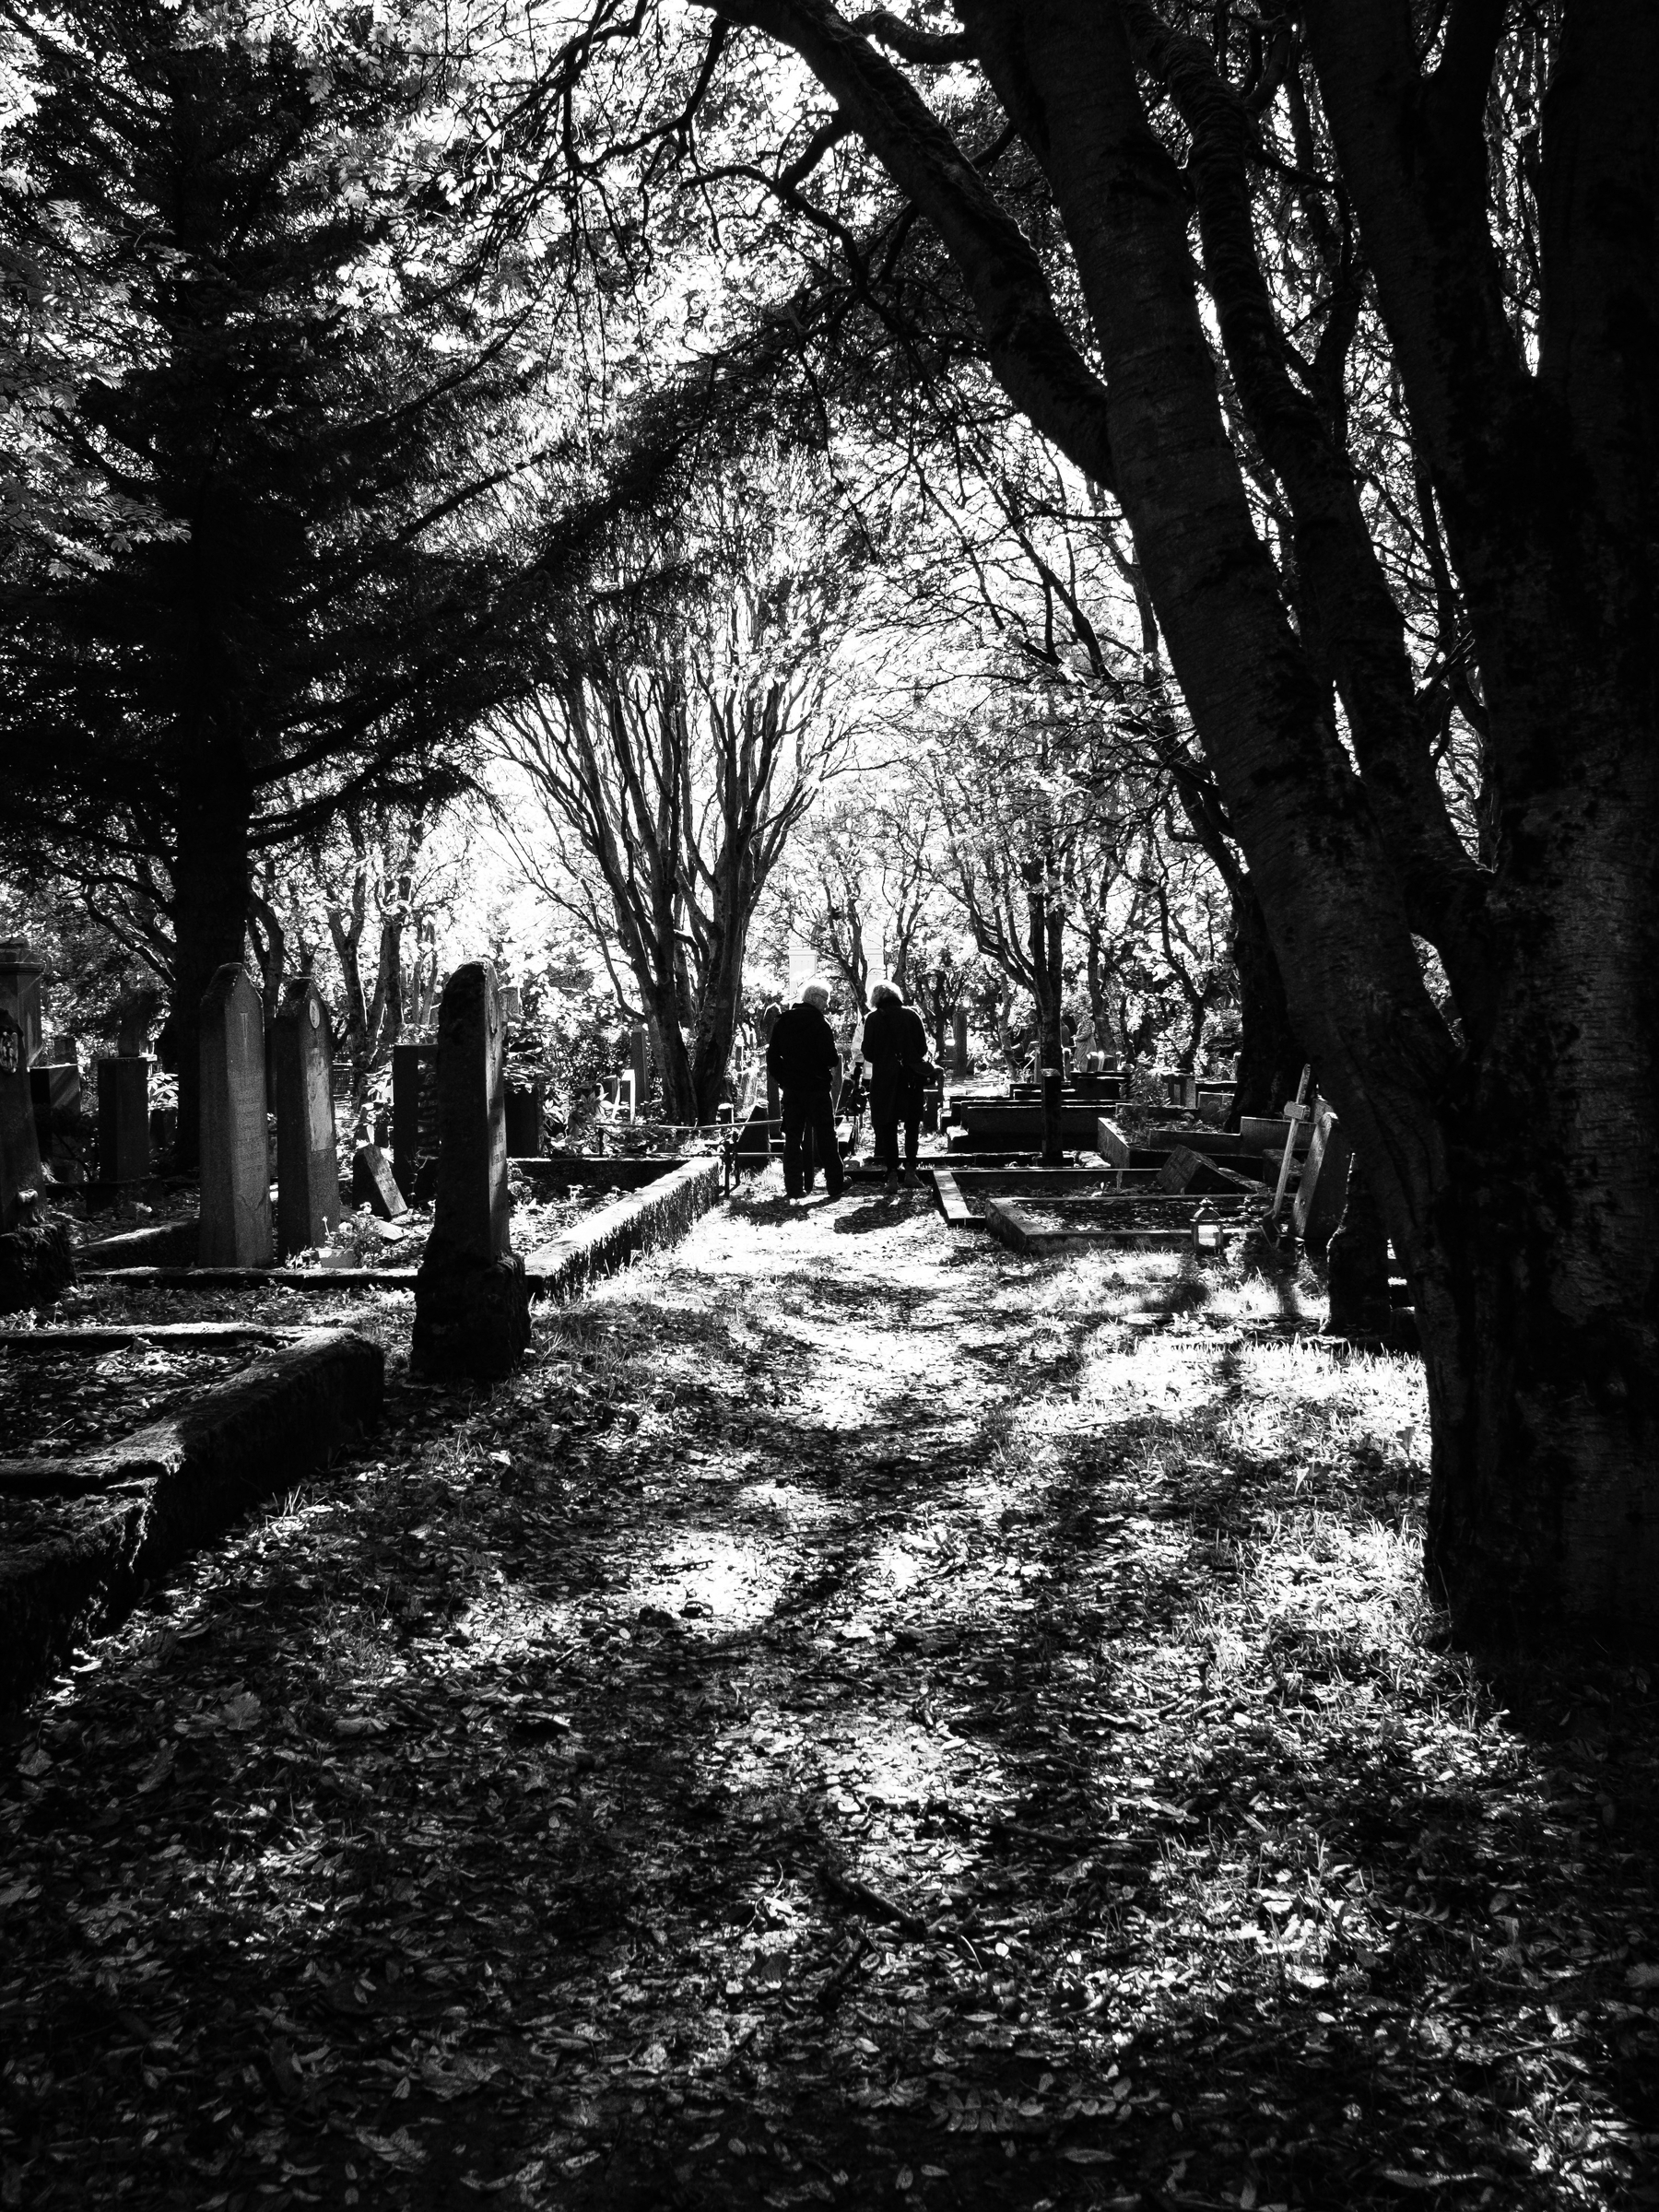 Two people stand in a cemetary filed with trees and the shadows of their branches.